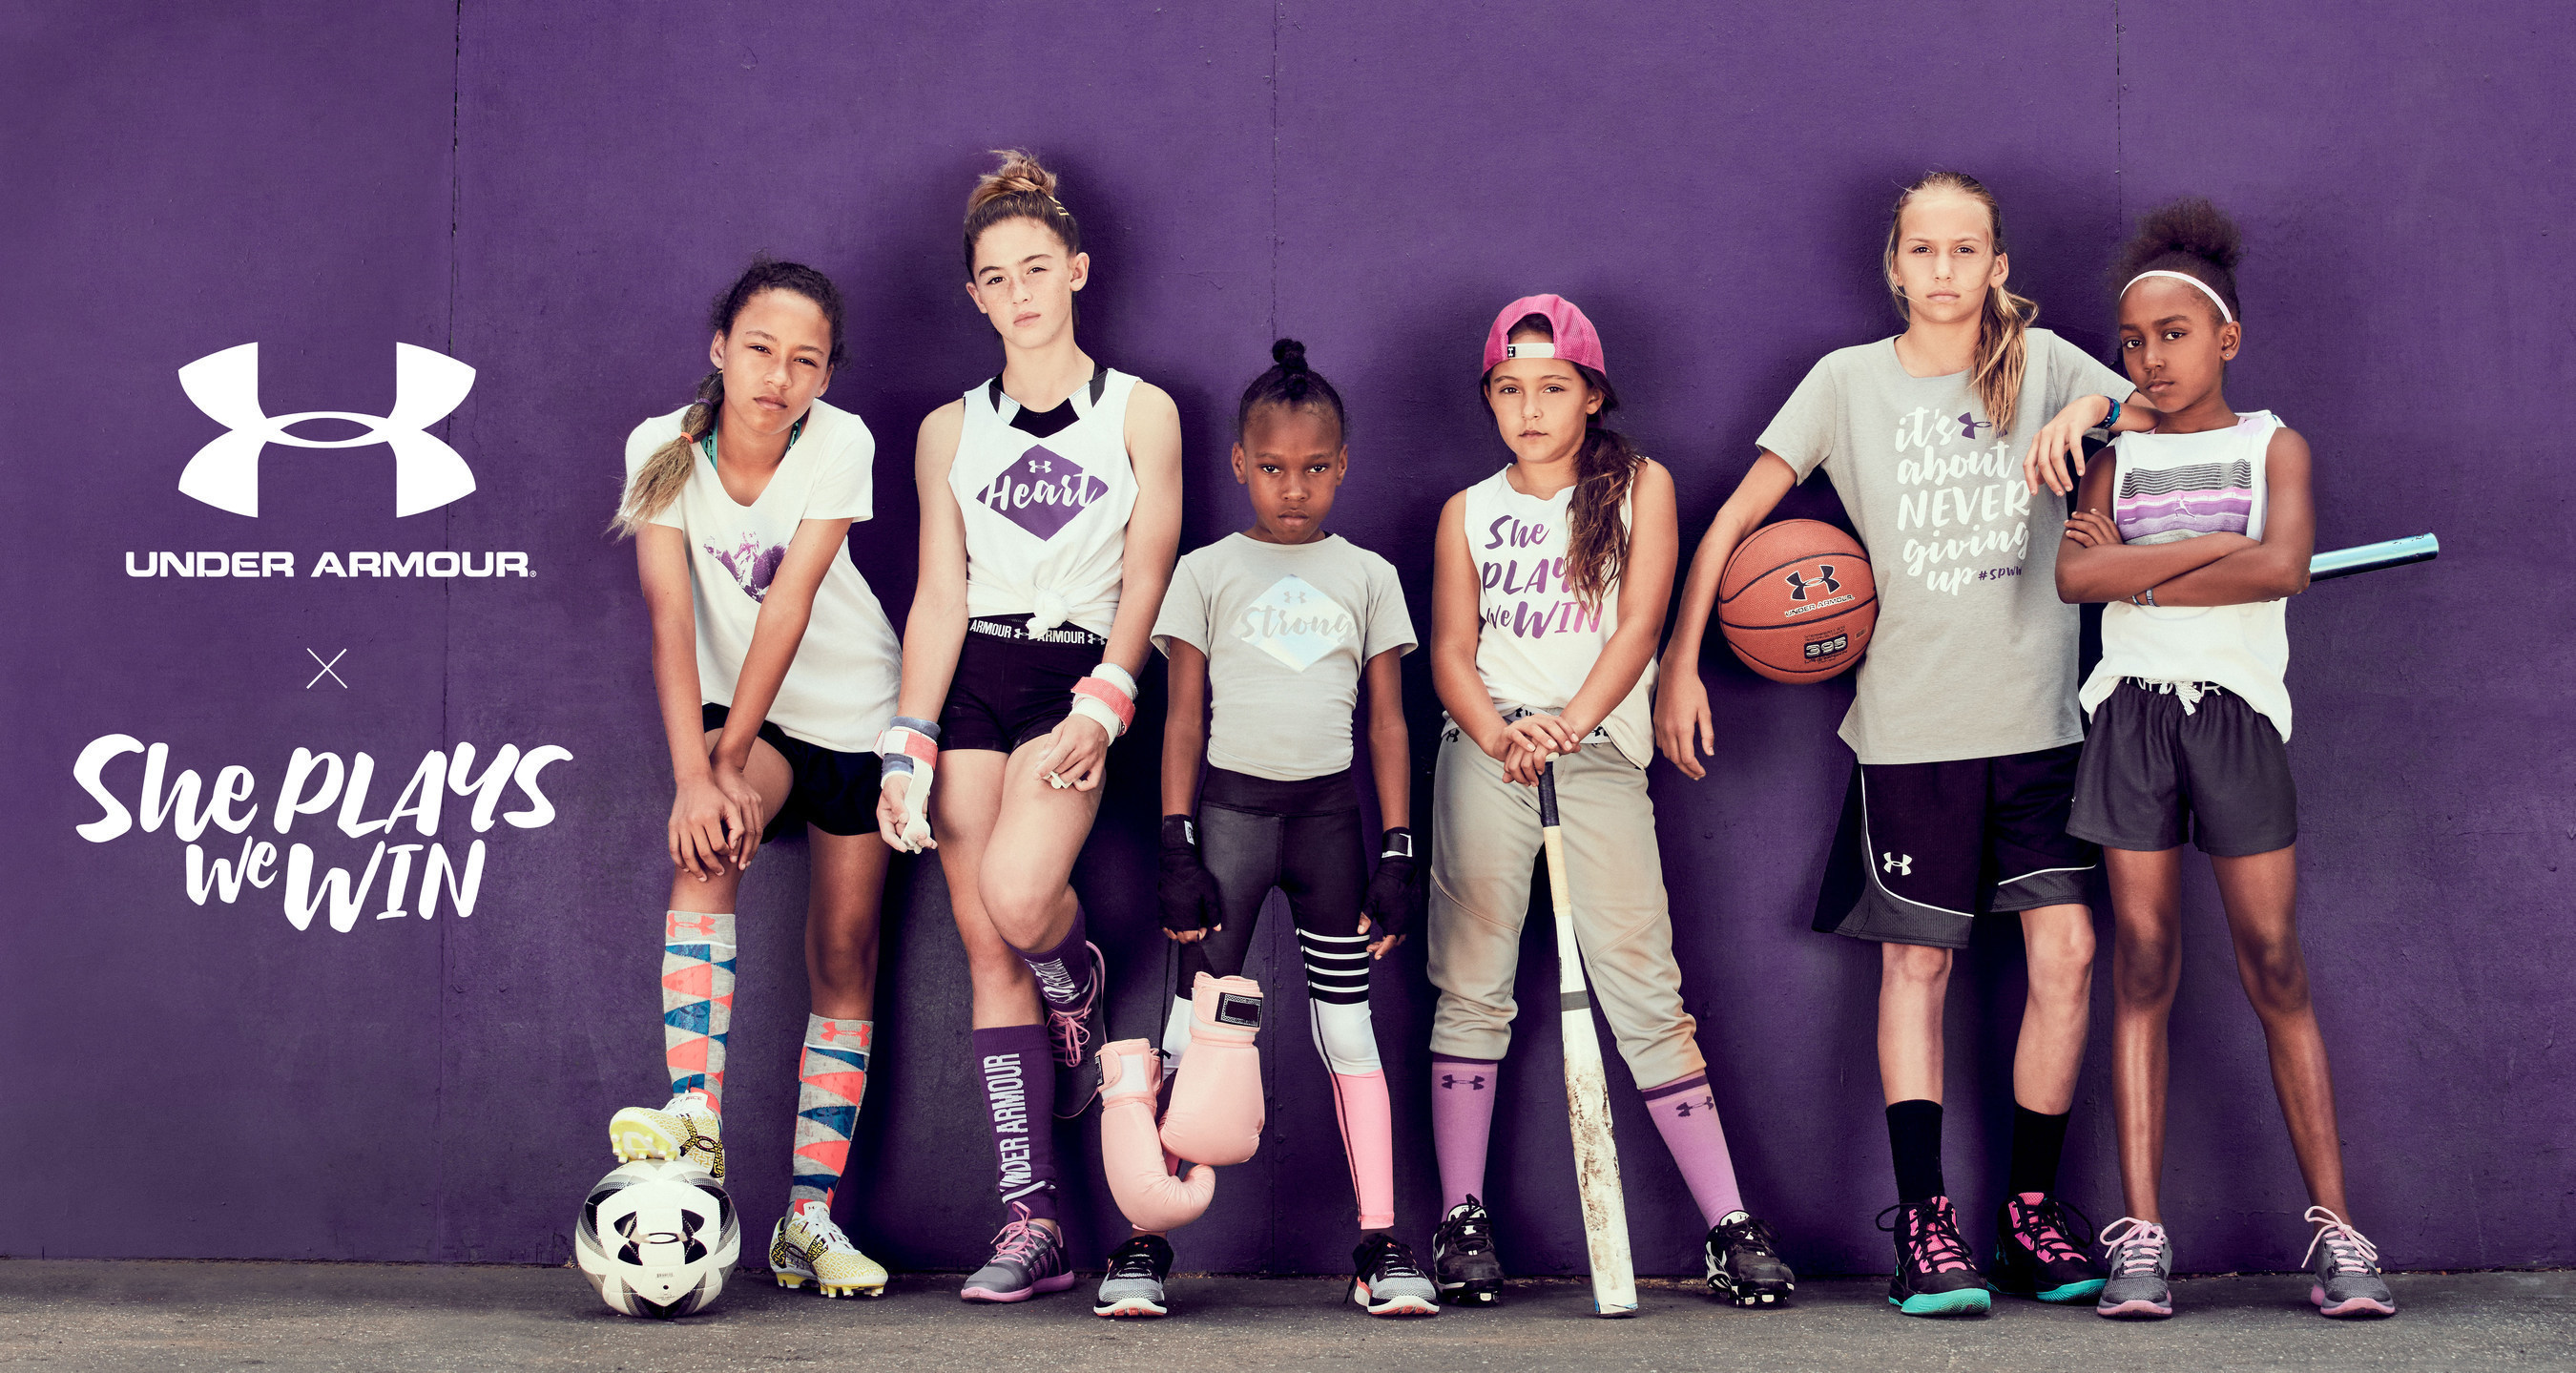 Under Armour Announces Partnership With "She Plays We Win" Initiative To Promote Young Girls In Sport